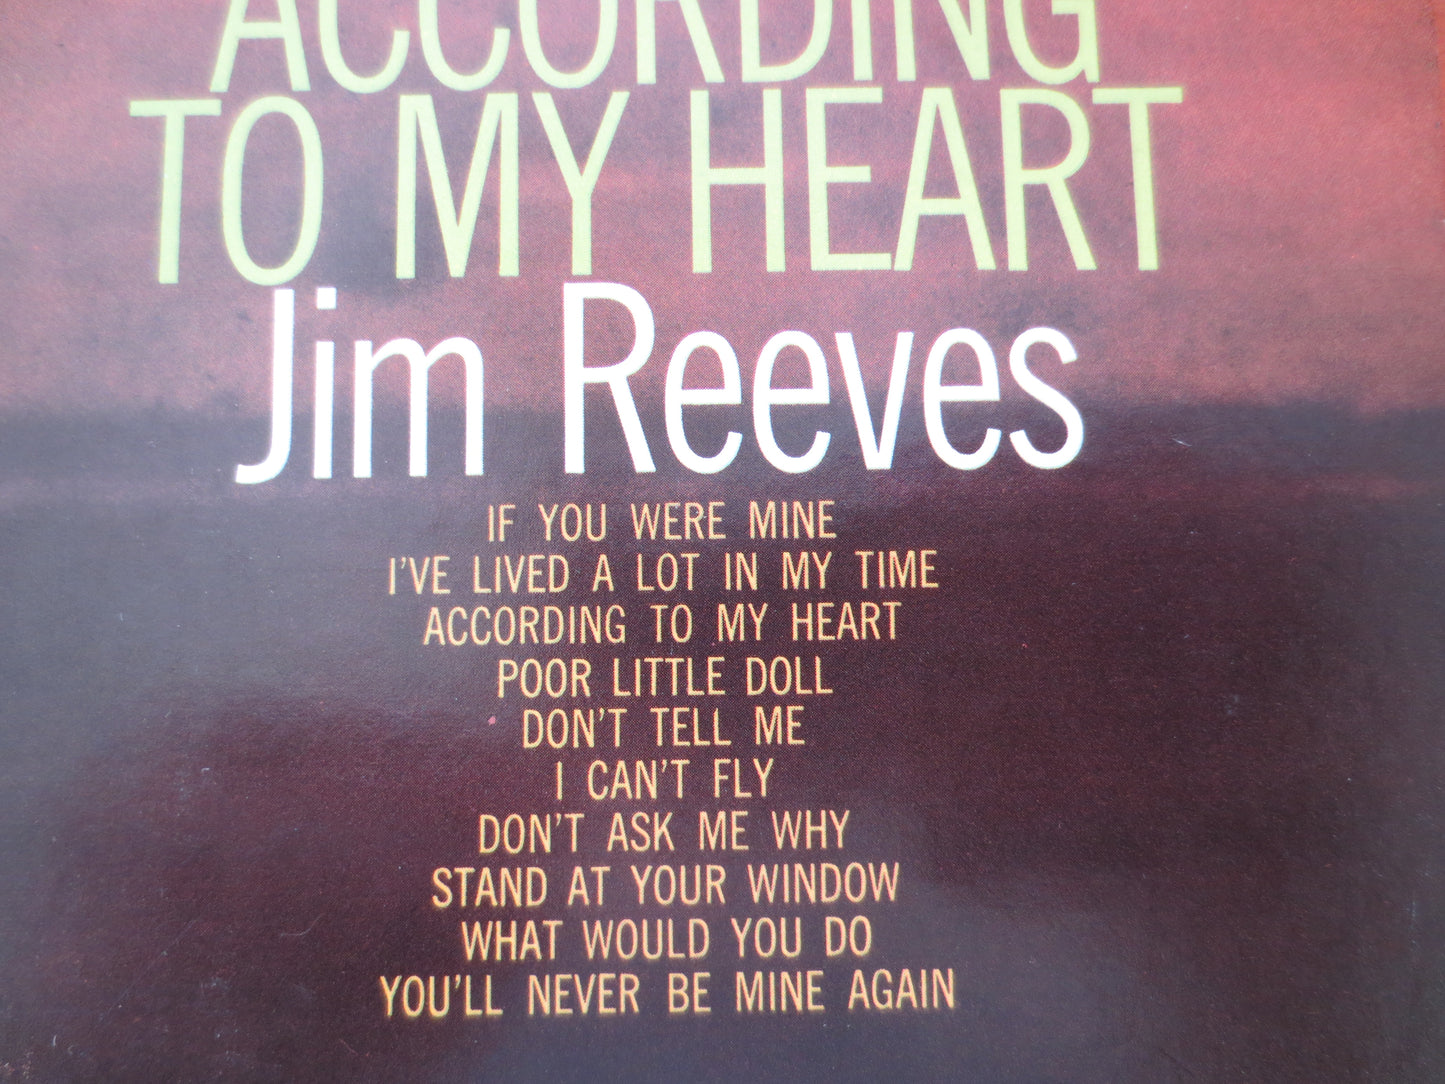 JIM REEVES, According to My HEART, Jim Reeves Albums, Jim Reeves Vinyl, Jim Reeves Lp, Country Vinyl,1960 Records